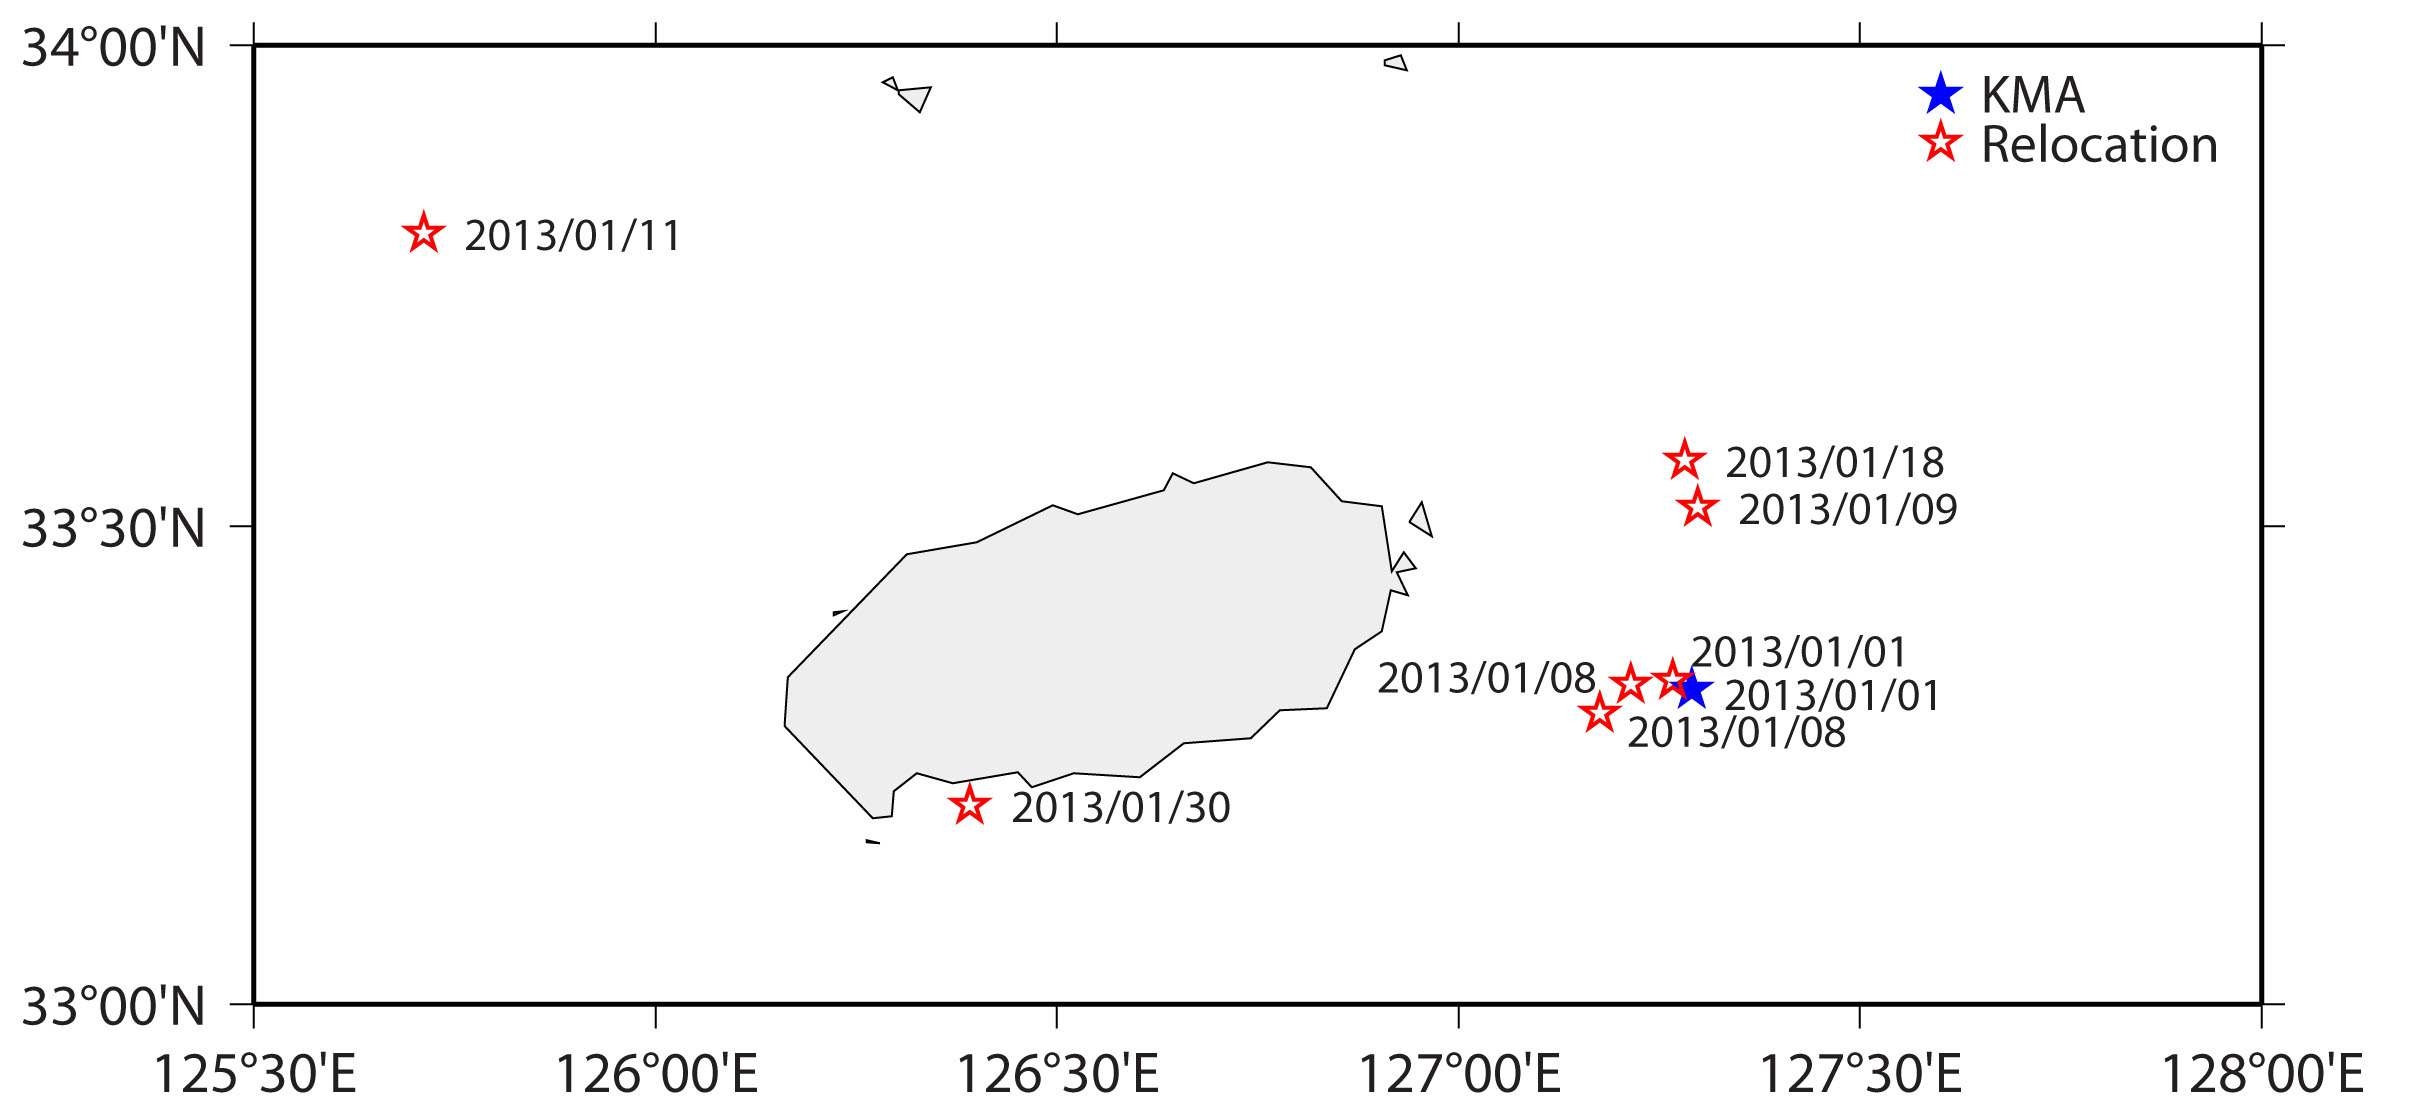 Fig. 2.1.10 Earthquakes detected in and around Jeju Island